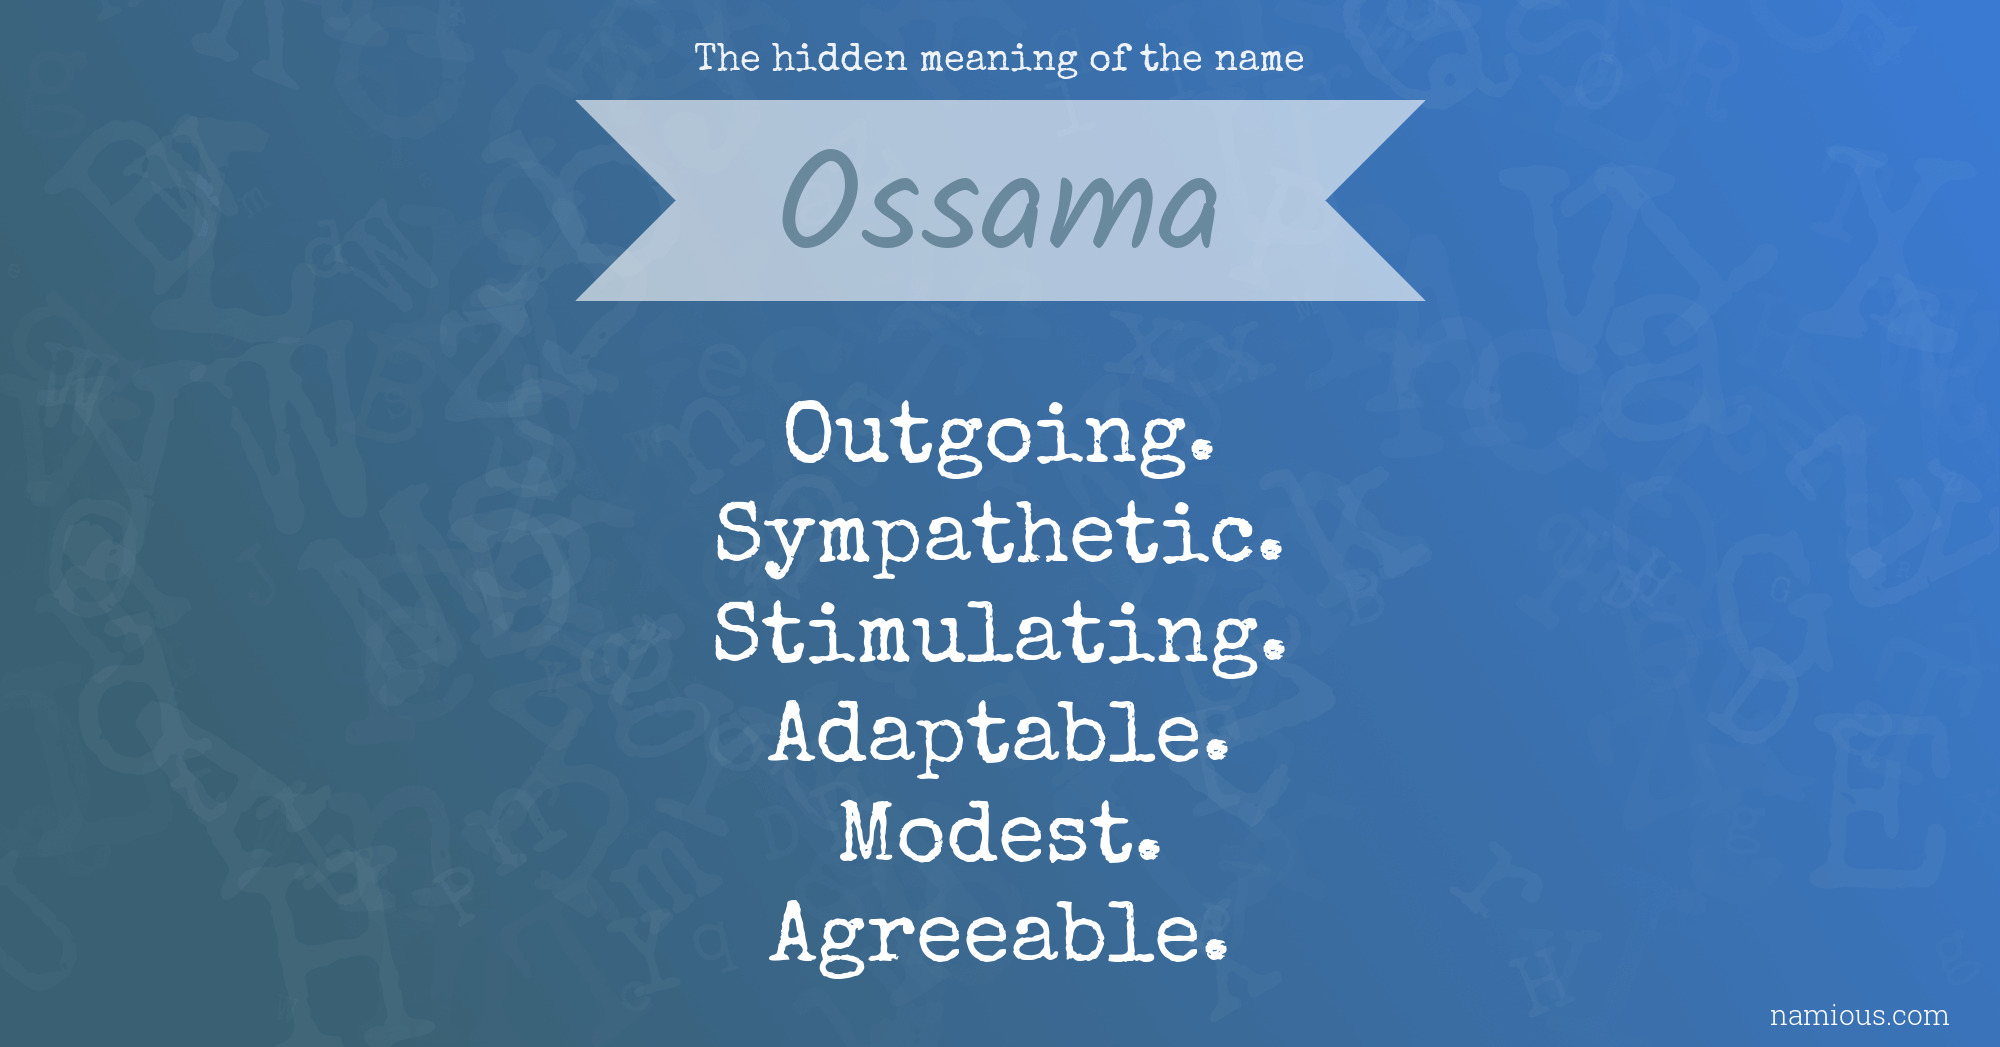 The hidden meaning of the name Ossama